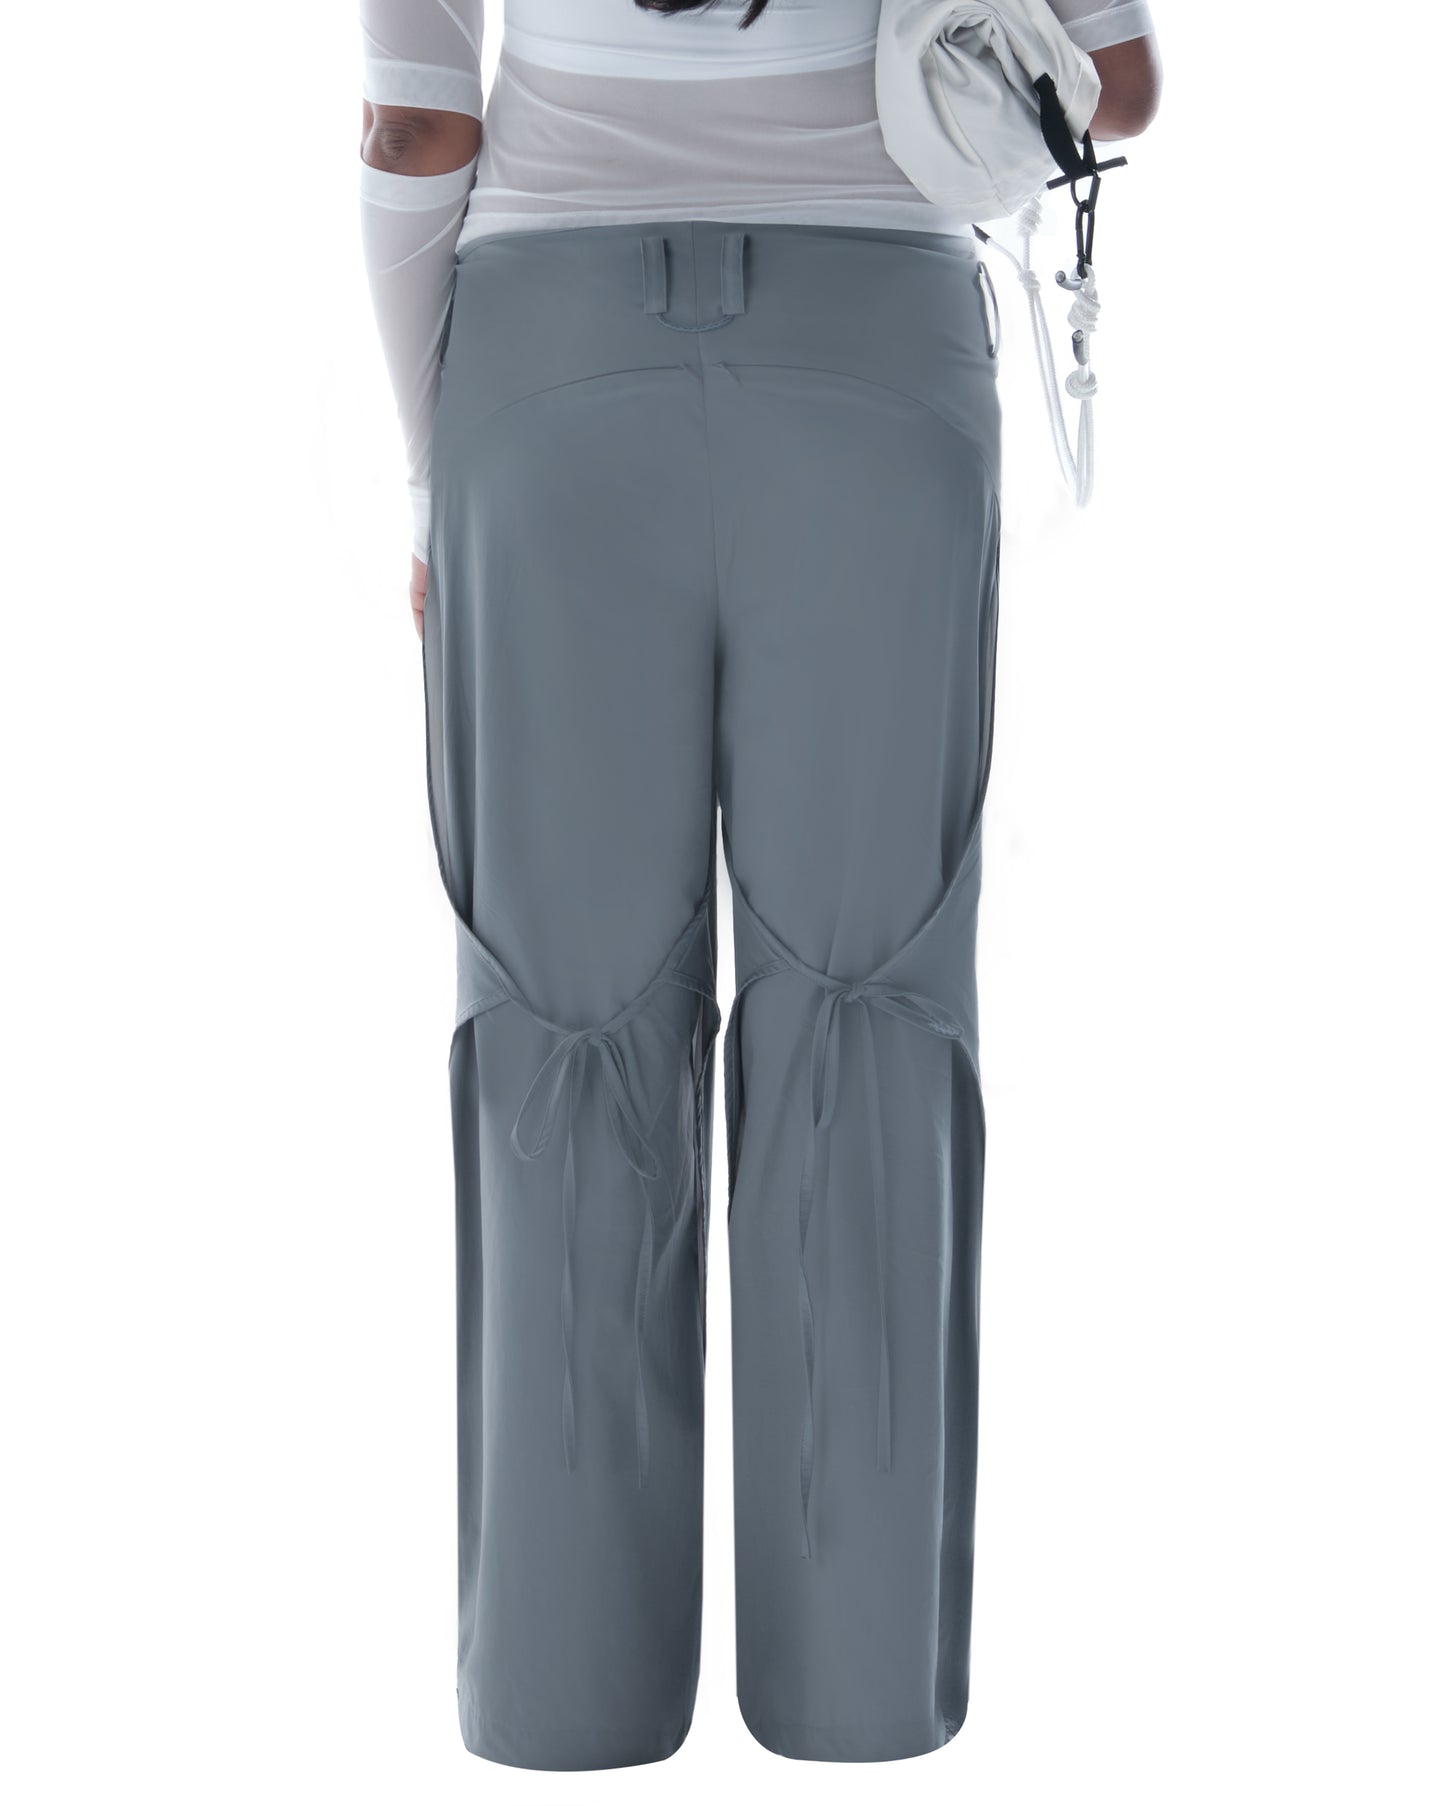 LENA BOW GREY TROUSERS